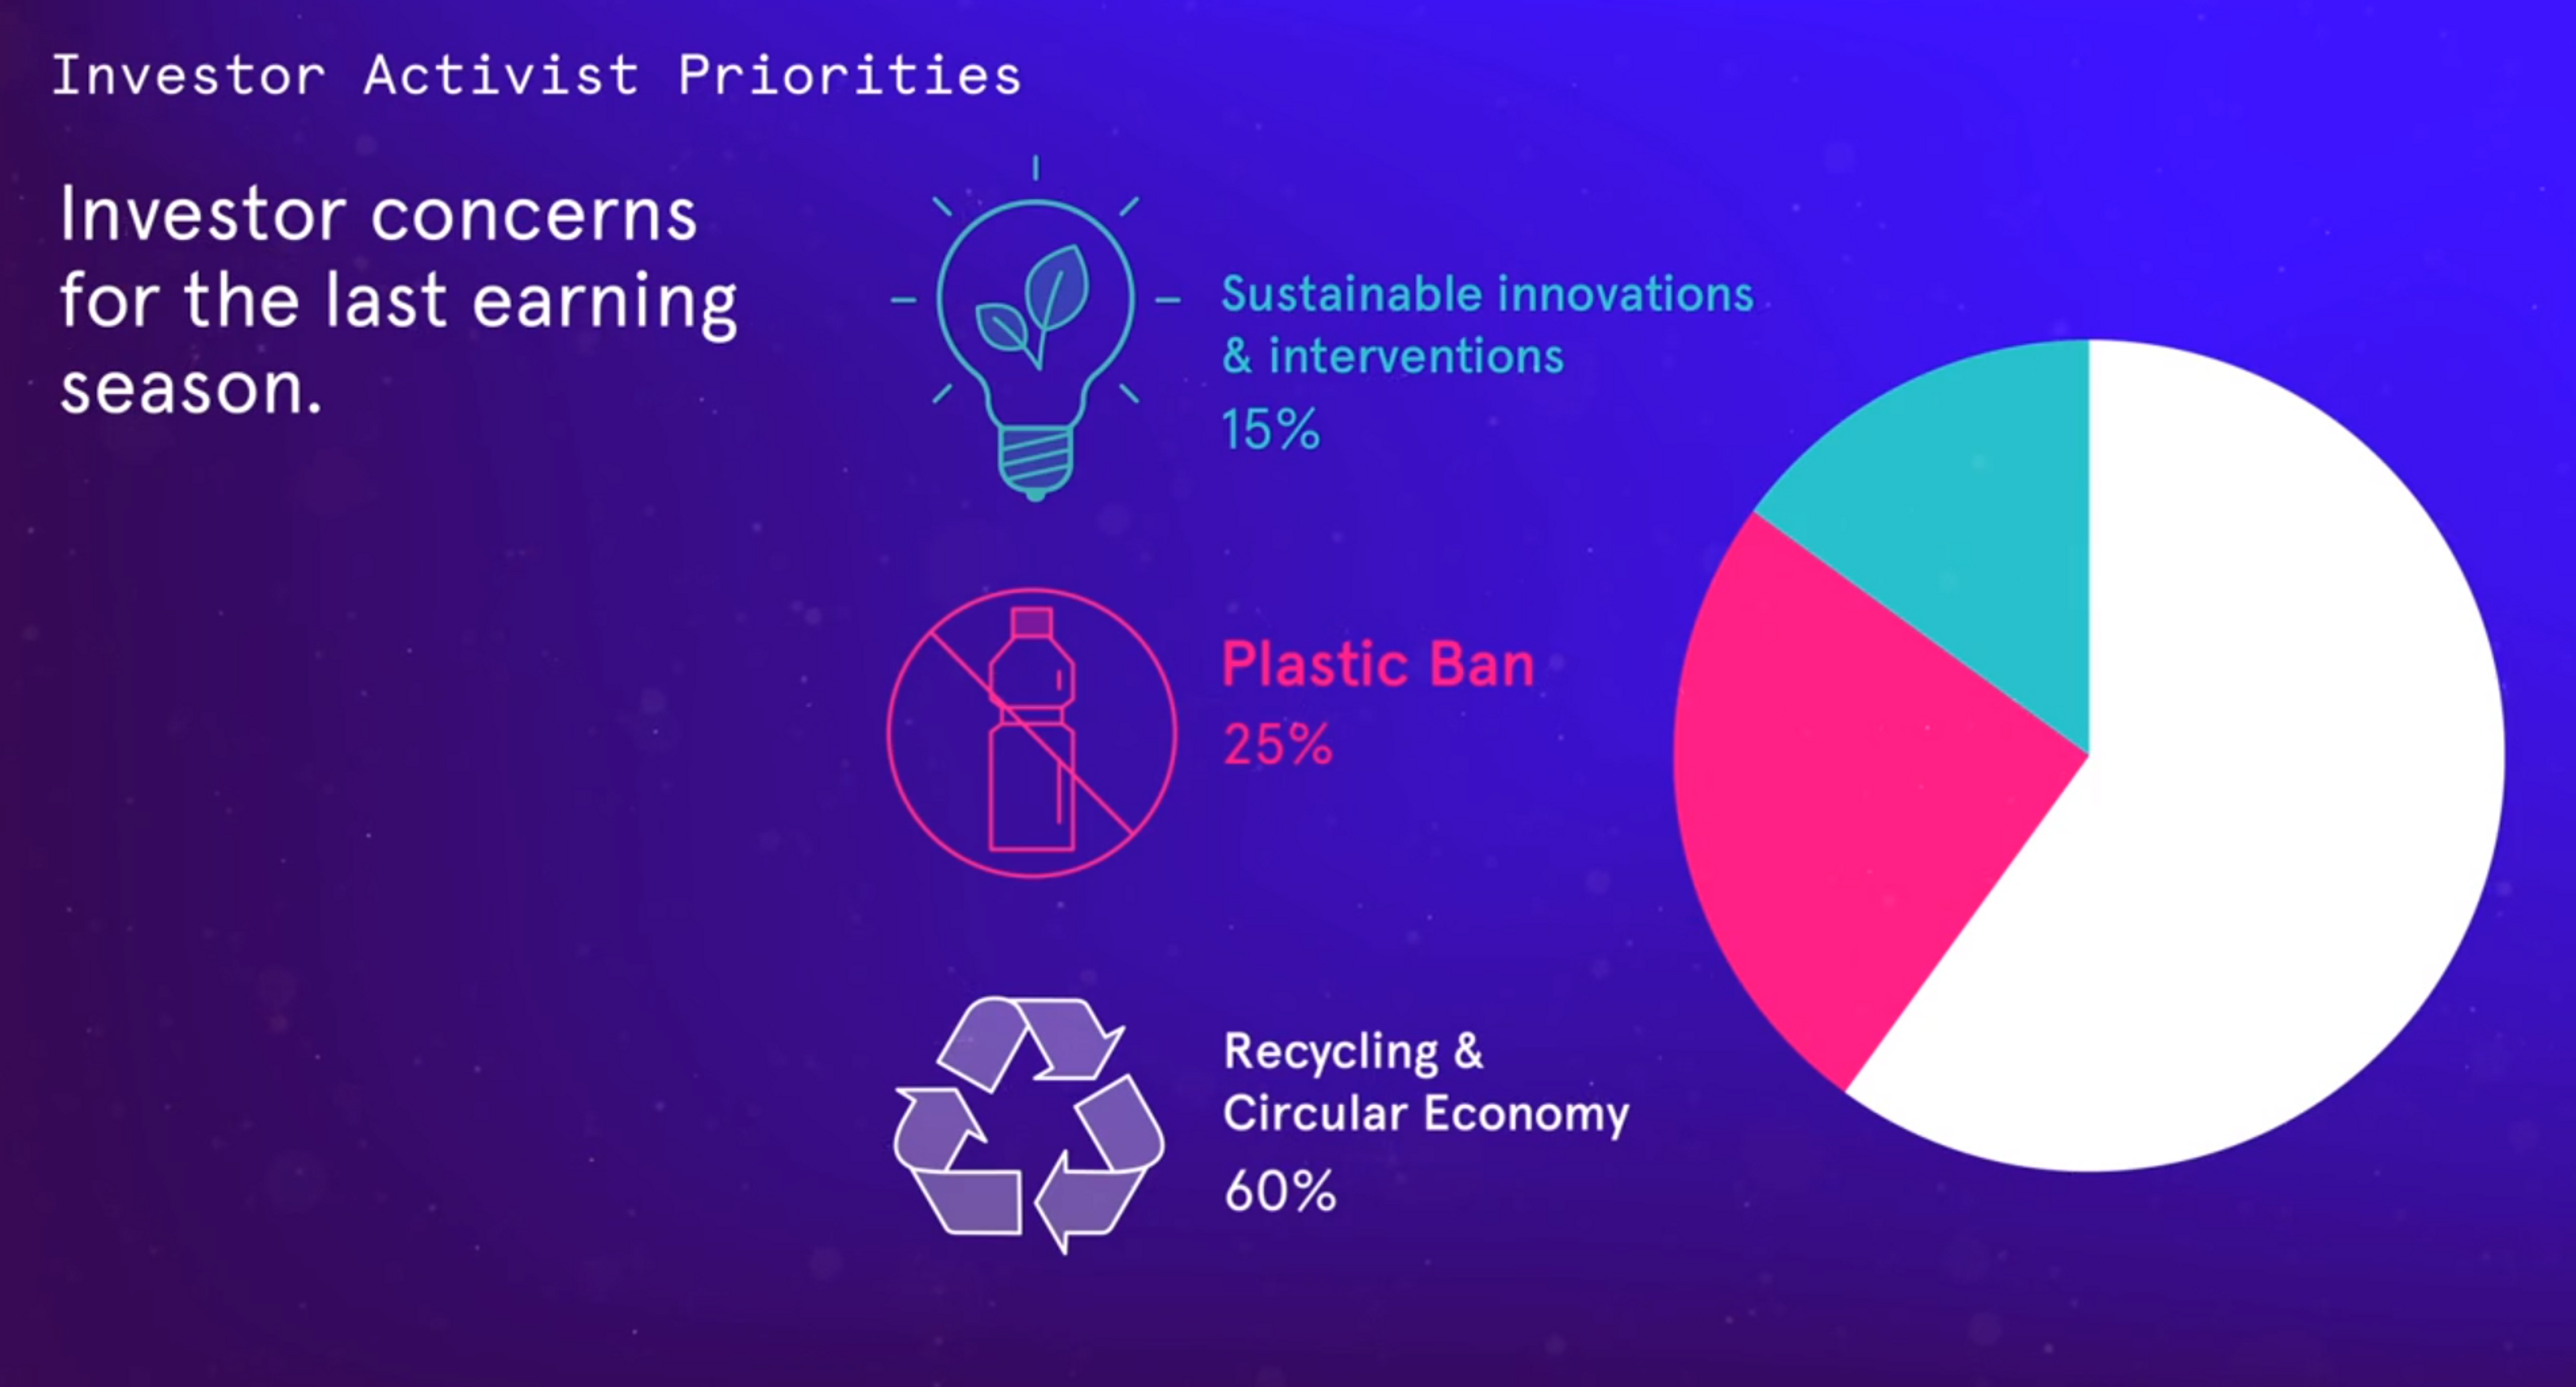 A pie chart showing the breakdown of investor concerns from the last earning season, split between sustainable innovations, plastic bans and the recycling circular economy